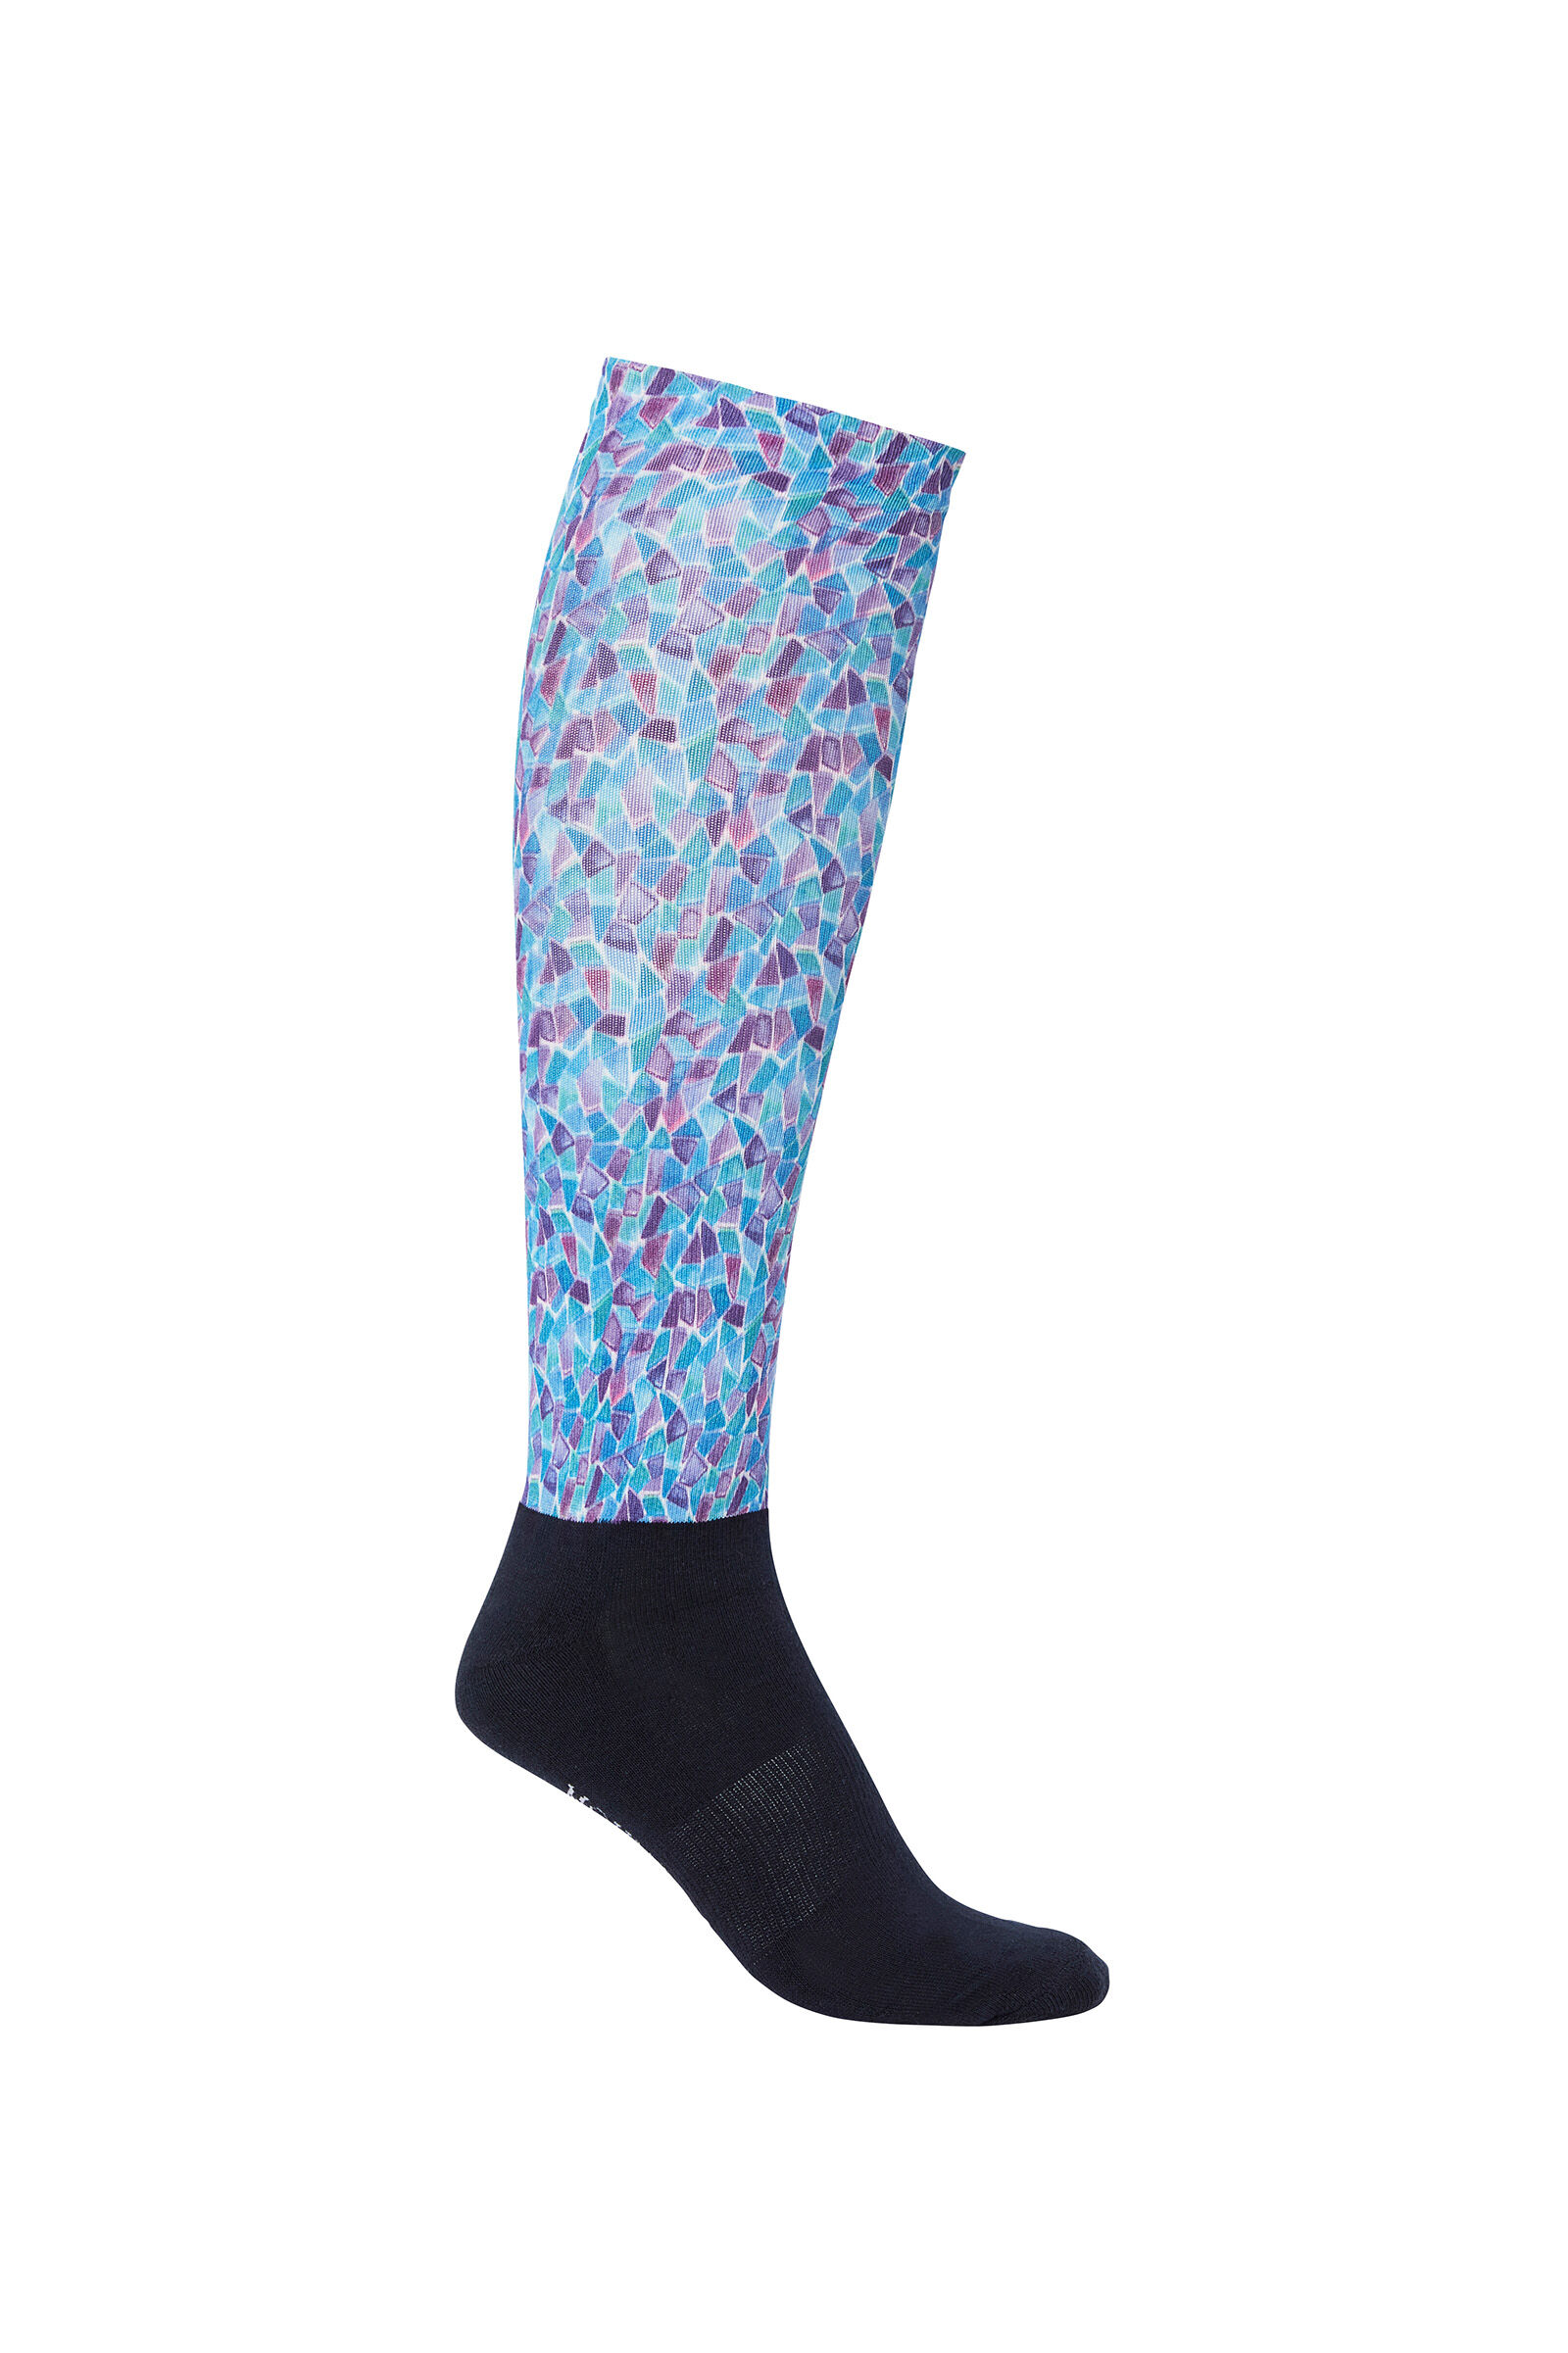 TWIN PACK ELICO TUSCANY LADIES HORSE RIDING LONG SOCKS 